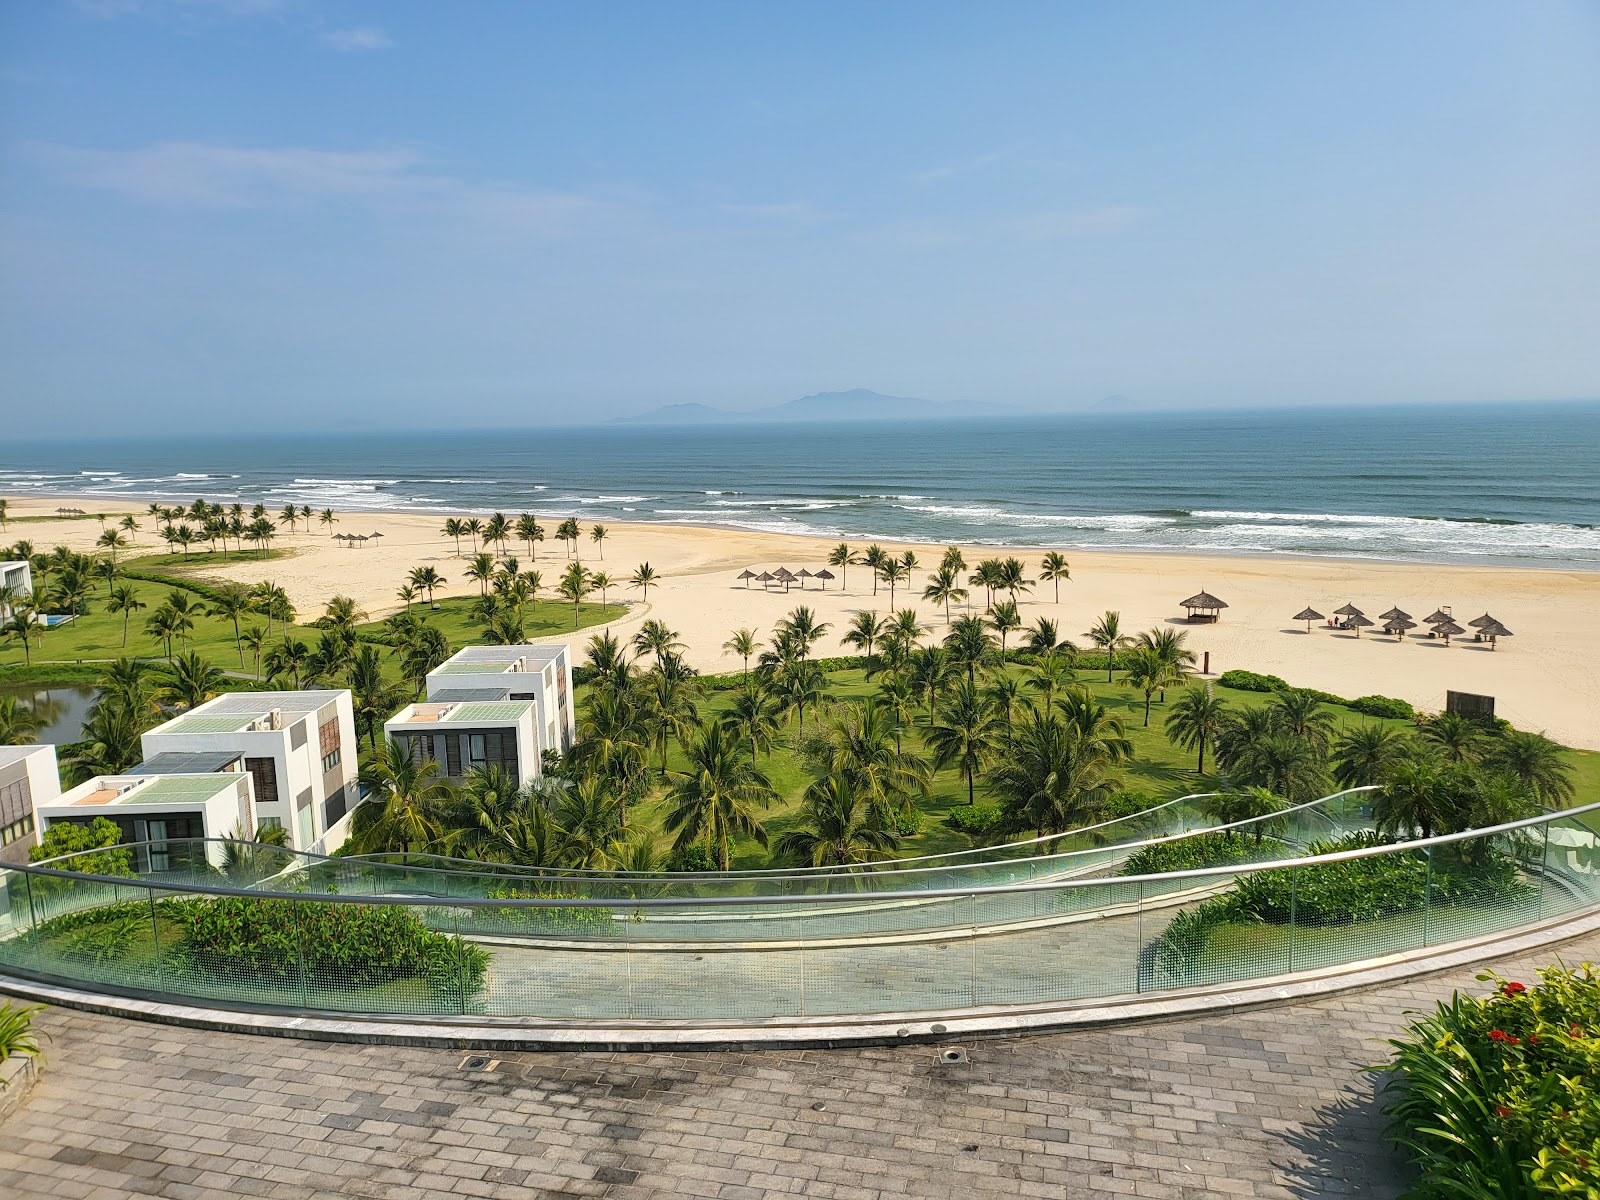 Photo of Thang Binh Beach - popular place among relax connoisseurs